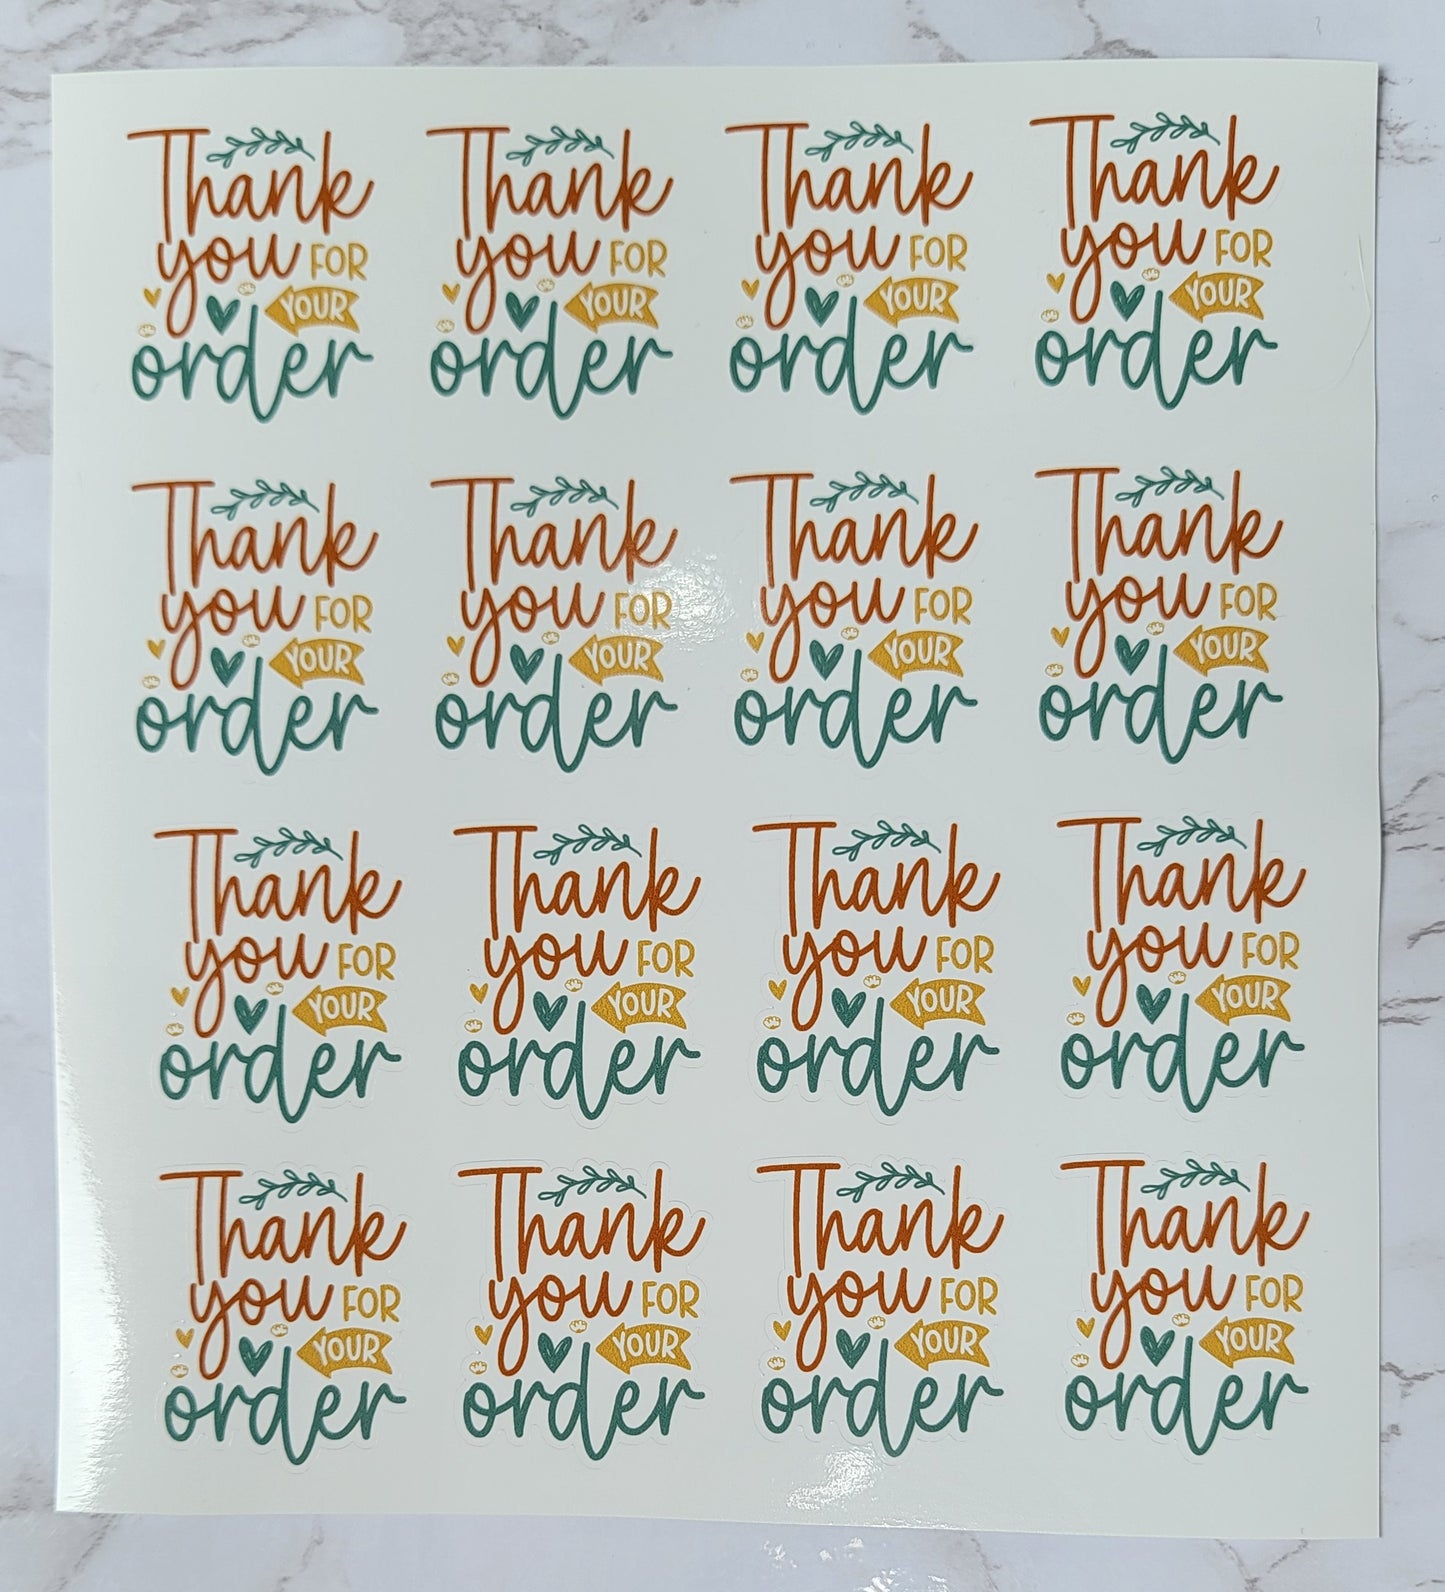 "Thank You For Your Order" - Cursive - Multicolored Font w/ White Background - Waterproof Sticker Sheet